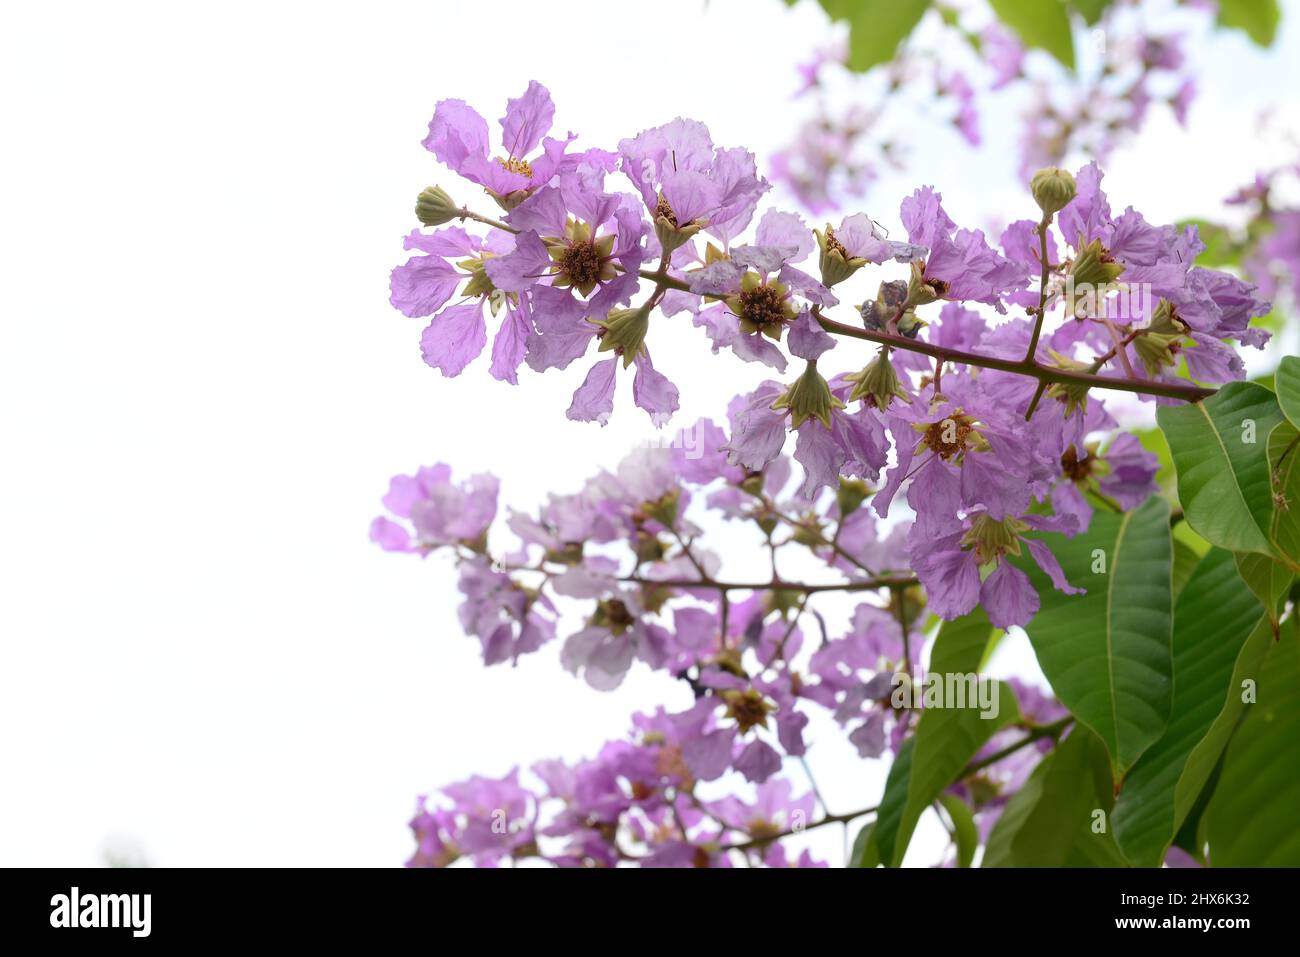 Lagerstroemia native to tropical southern Asia. It is a deciduous tree with bright pink to light purple flowers. Stock Photo